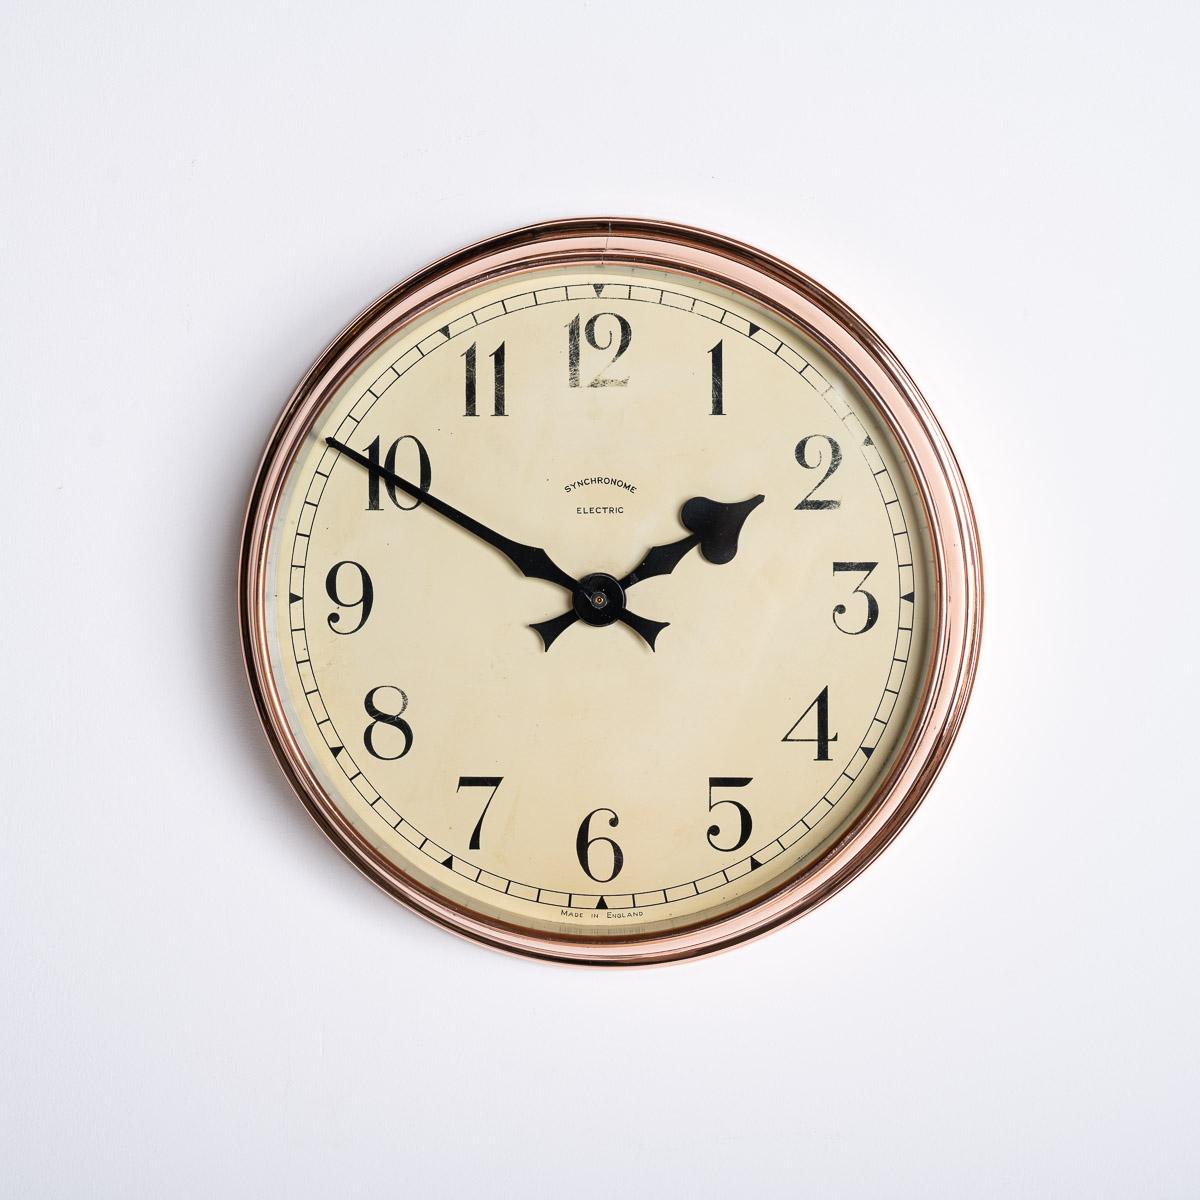 SYNCHRONOME VINTAGE INDUSTRIAL COPPER CLOCK

A beautiful copper industrial clock by Synchronome.

English Made circa 1930

Synchronome were the preeminent clock maker throughout the early & mid 20th century, commercially producing the most accurate